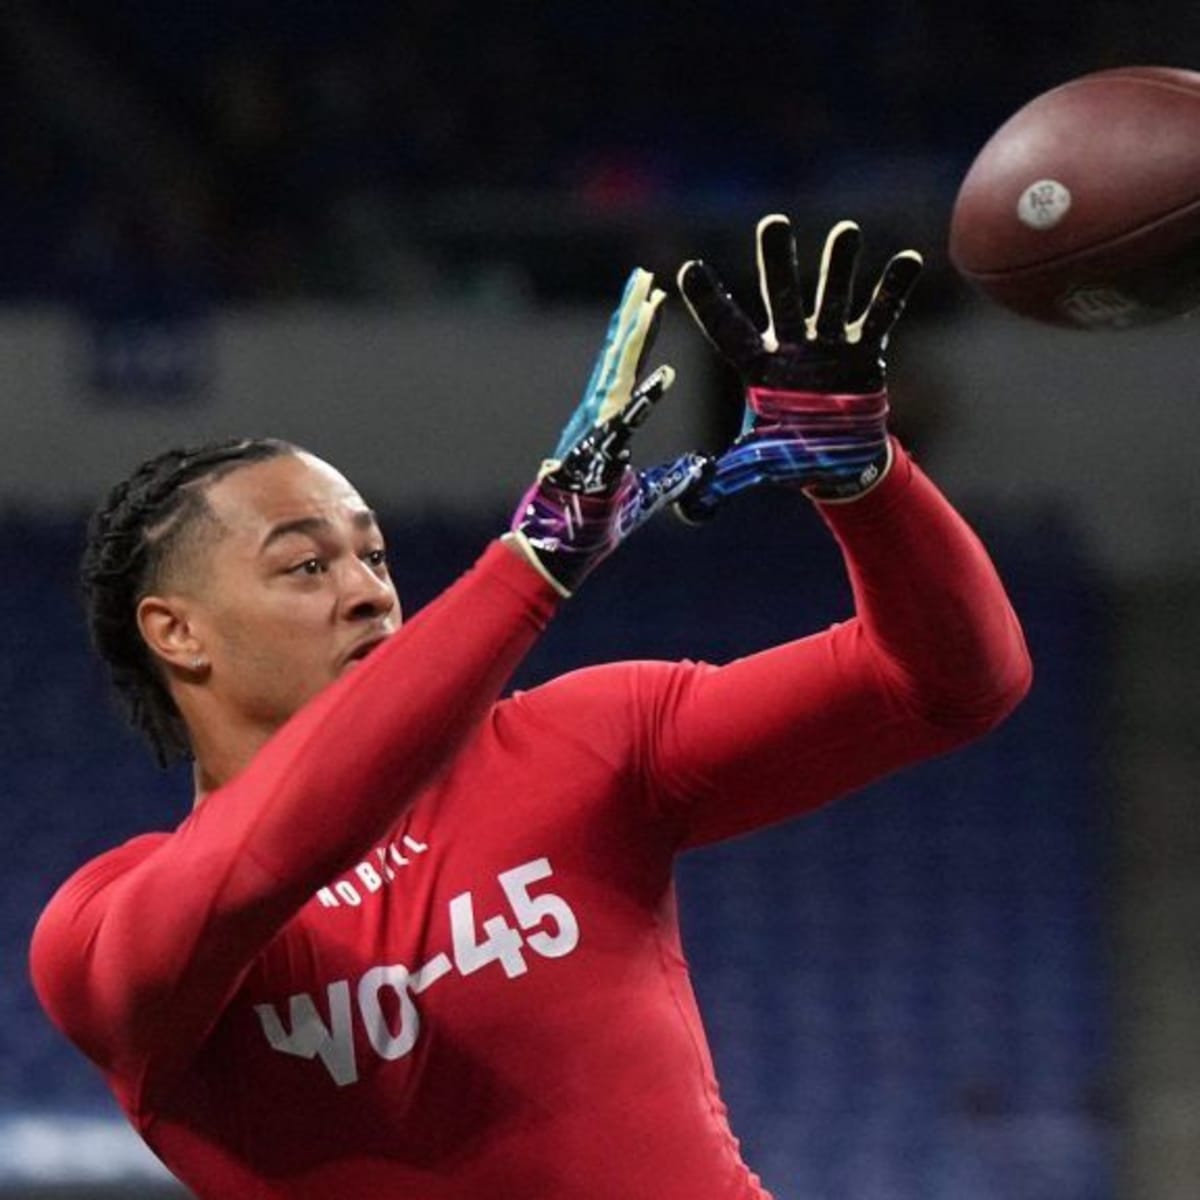 Jaxon Smith-Njigba: “I'm A Top 5 Player” in the 2023 NFL Draft - Visit NFL  Draft on Sports Illustrated, the latest news coverage, with rankings for NFL  Draft prospects, College Football, Dynasty